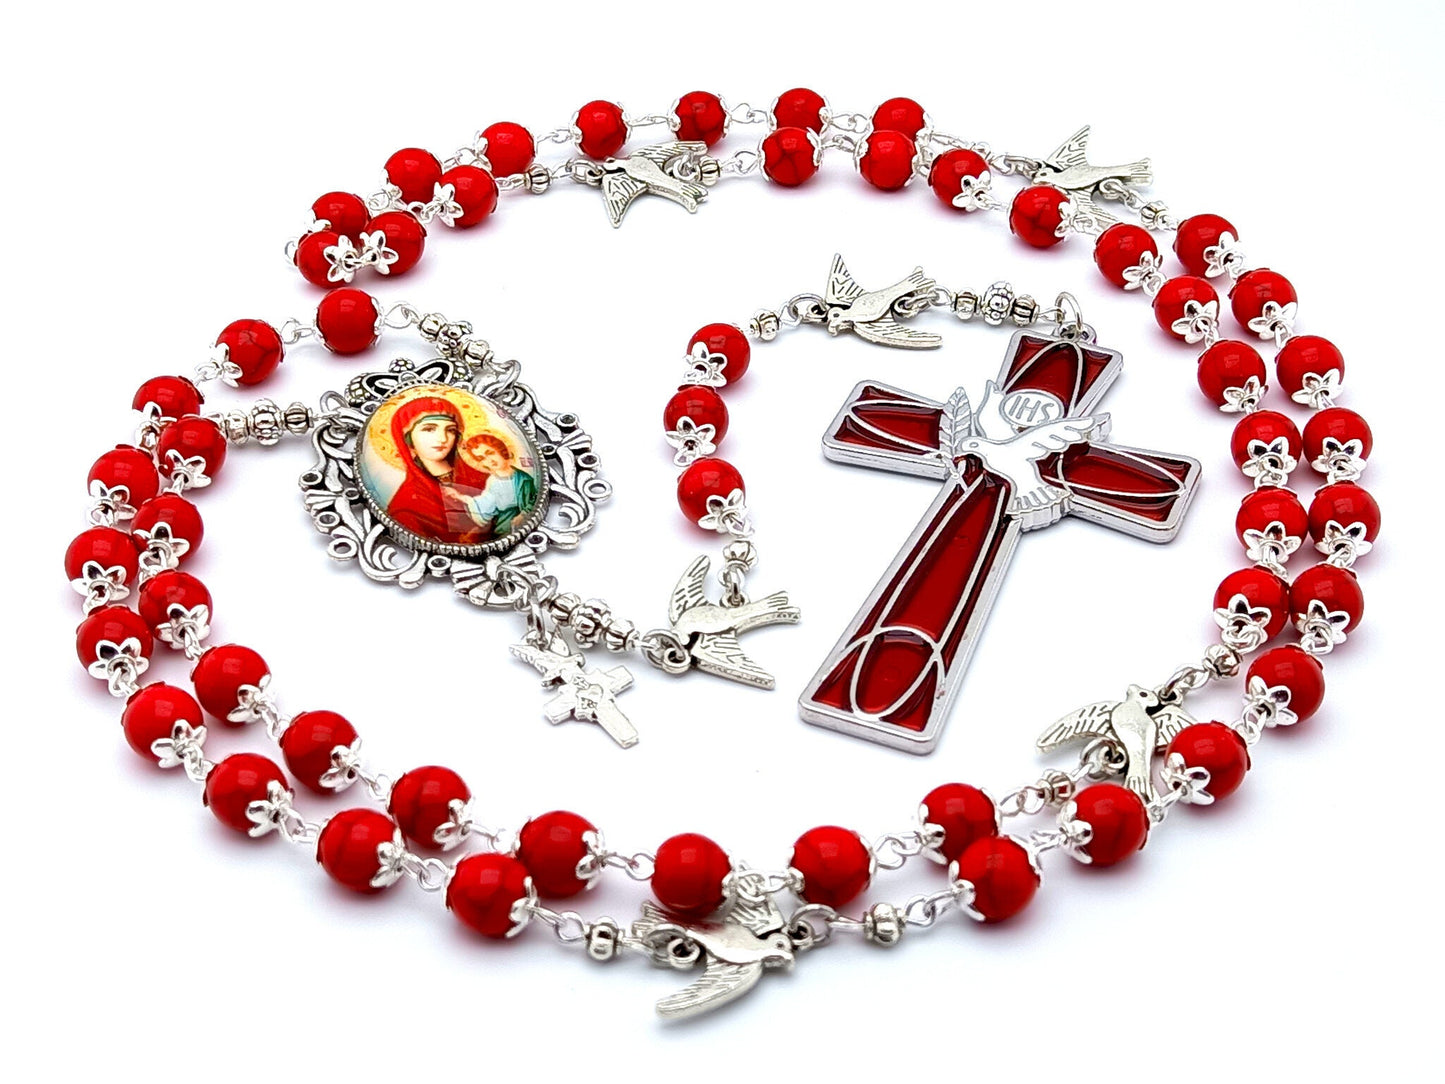 Our Lady of Perpetual Help unique rosary beads with red gemstone beads, silver and red enamel dove crucifix, silver dove pater beads and picture centre medal.